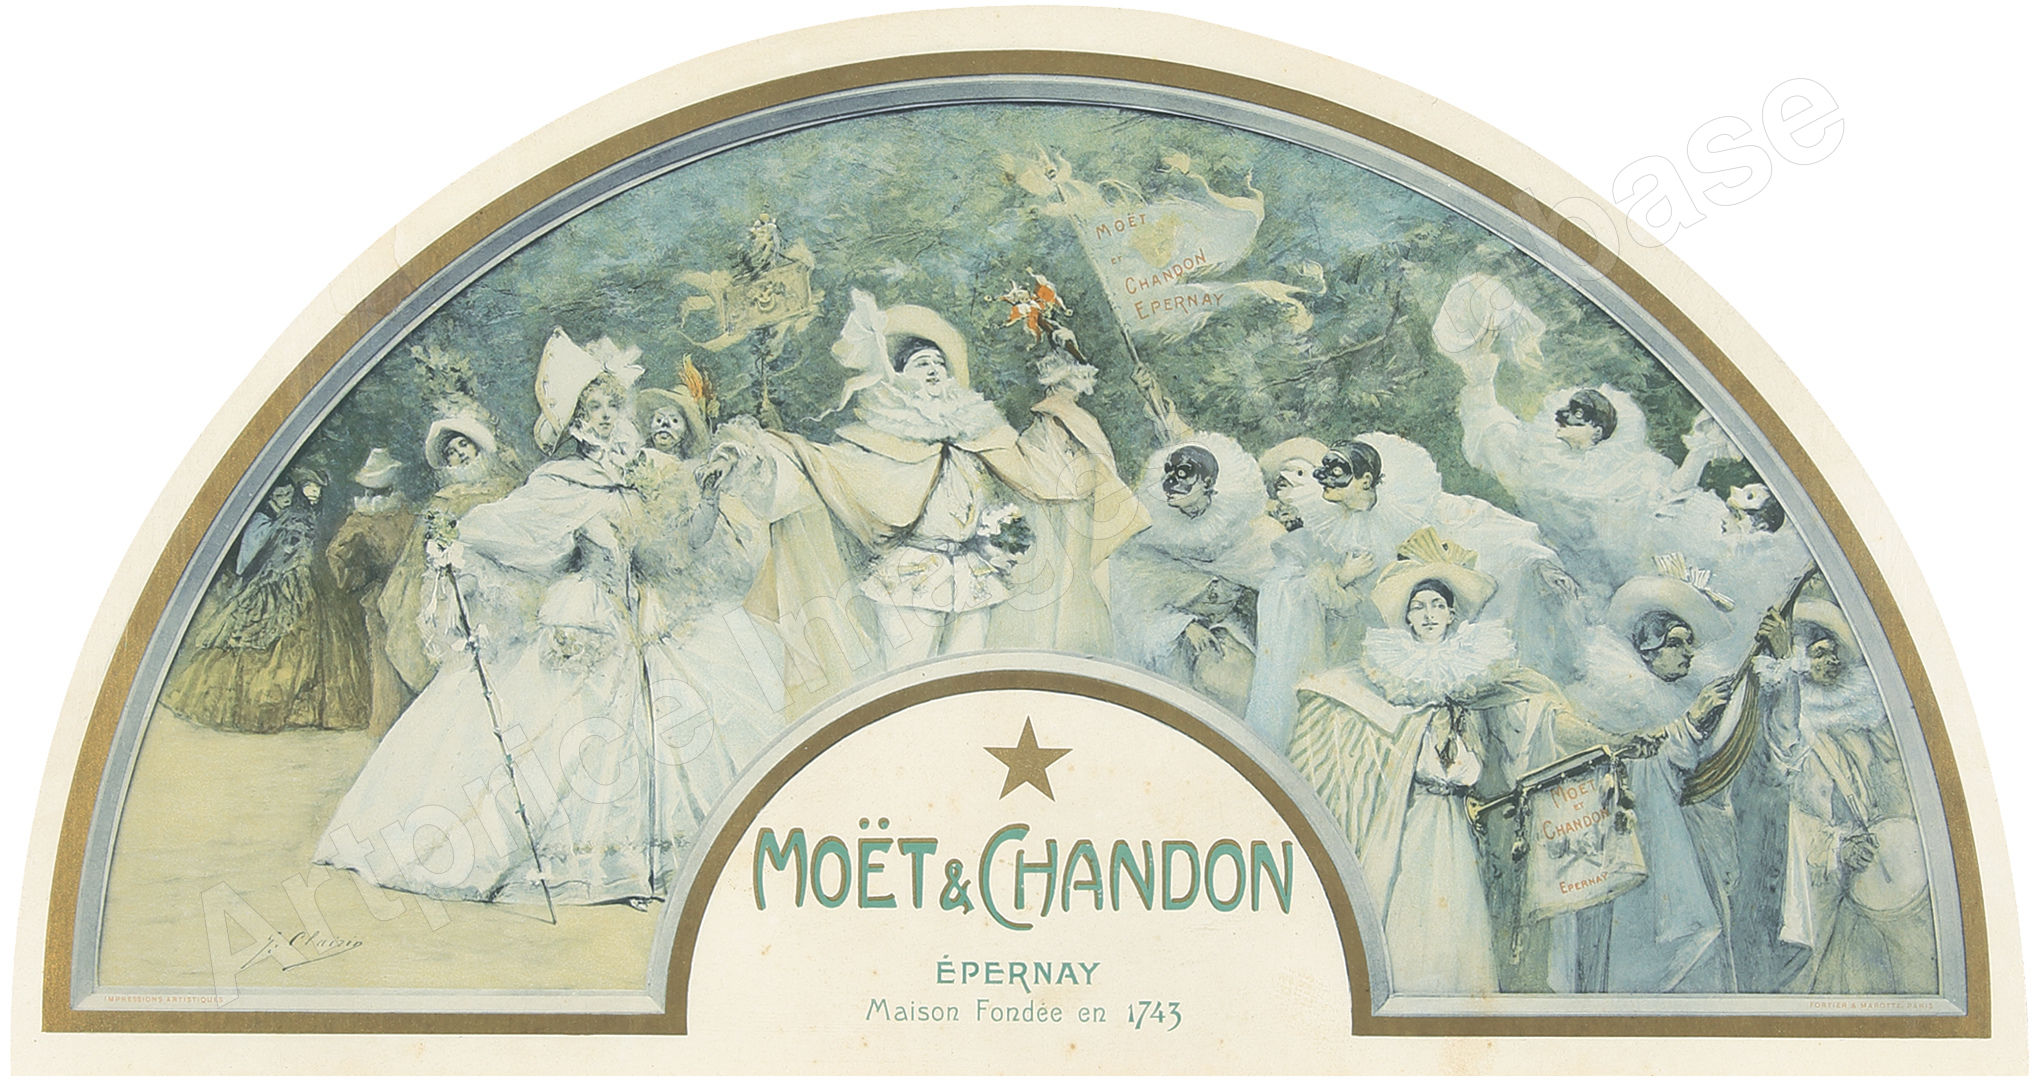 Moet_Chandon-Chanpagne_epernay_georges-clairin_aurore_Morisse_affaire-conclue-Champagne